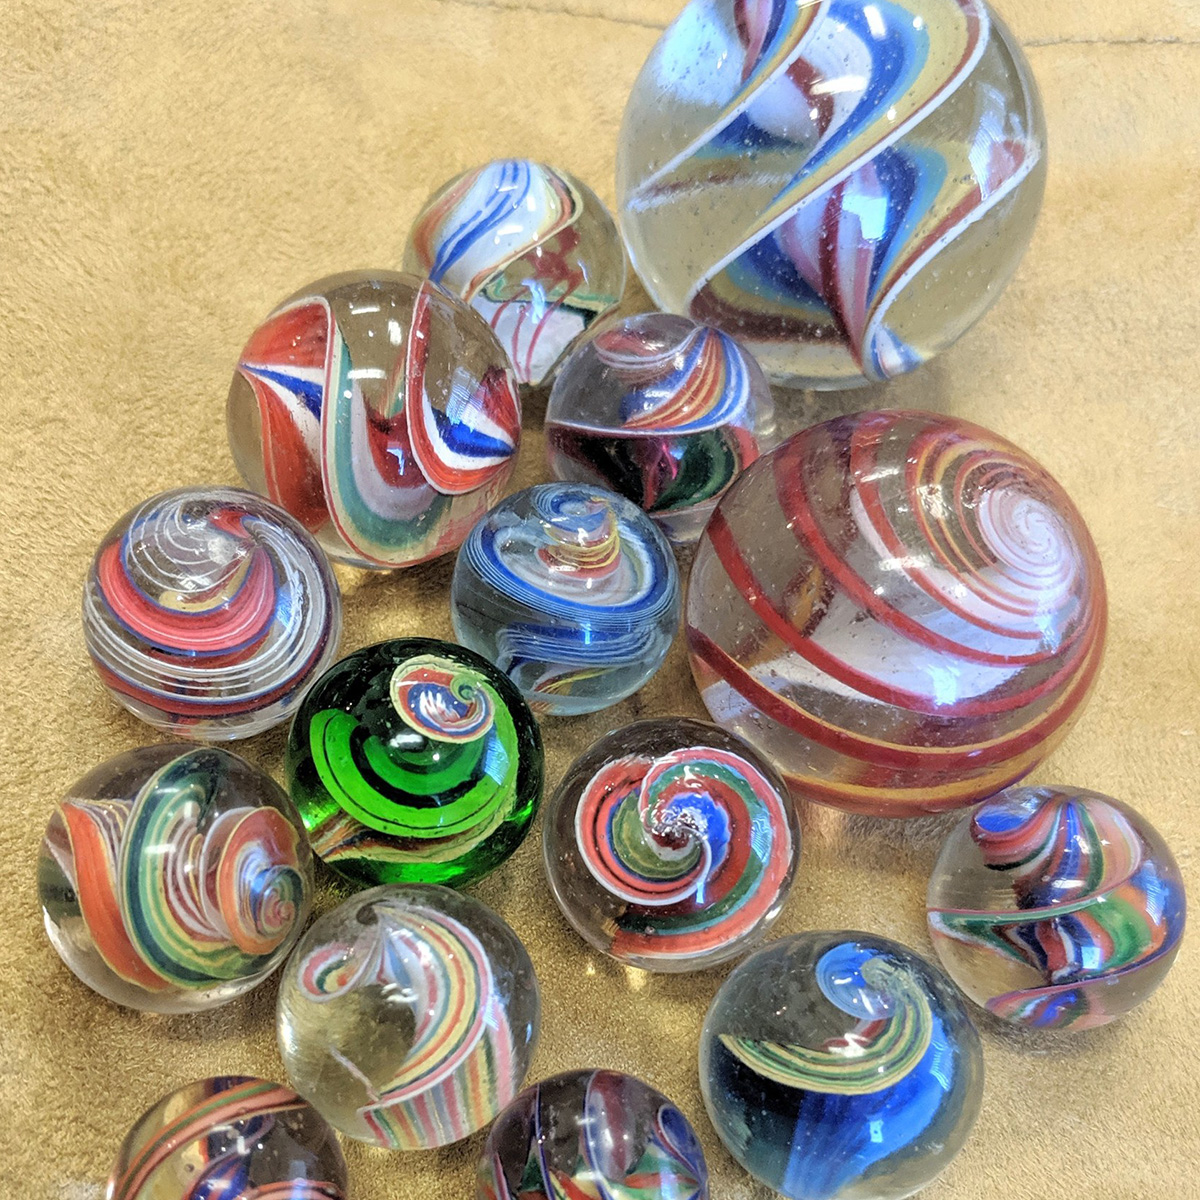 Group of Ribbon Core Swirl marbles